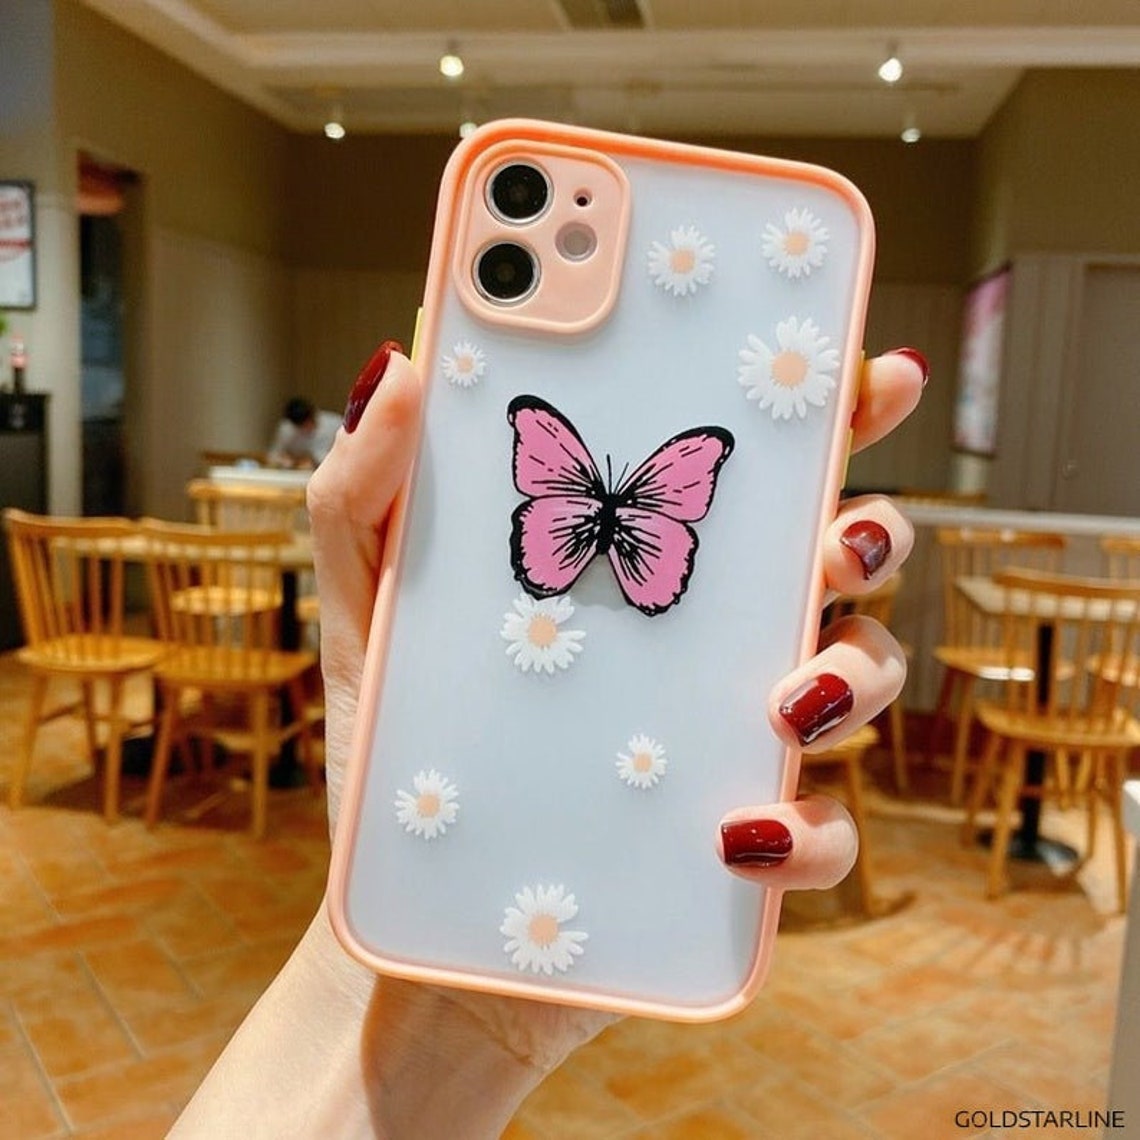 10 Adorable iPhone 11 Cases That Will Make Your Heart Melt